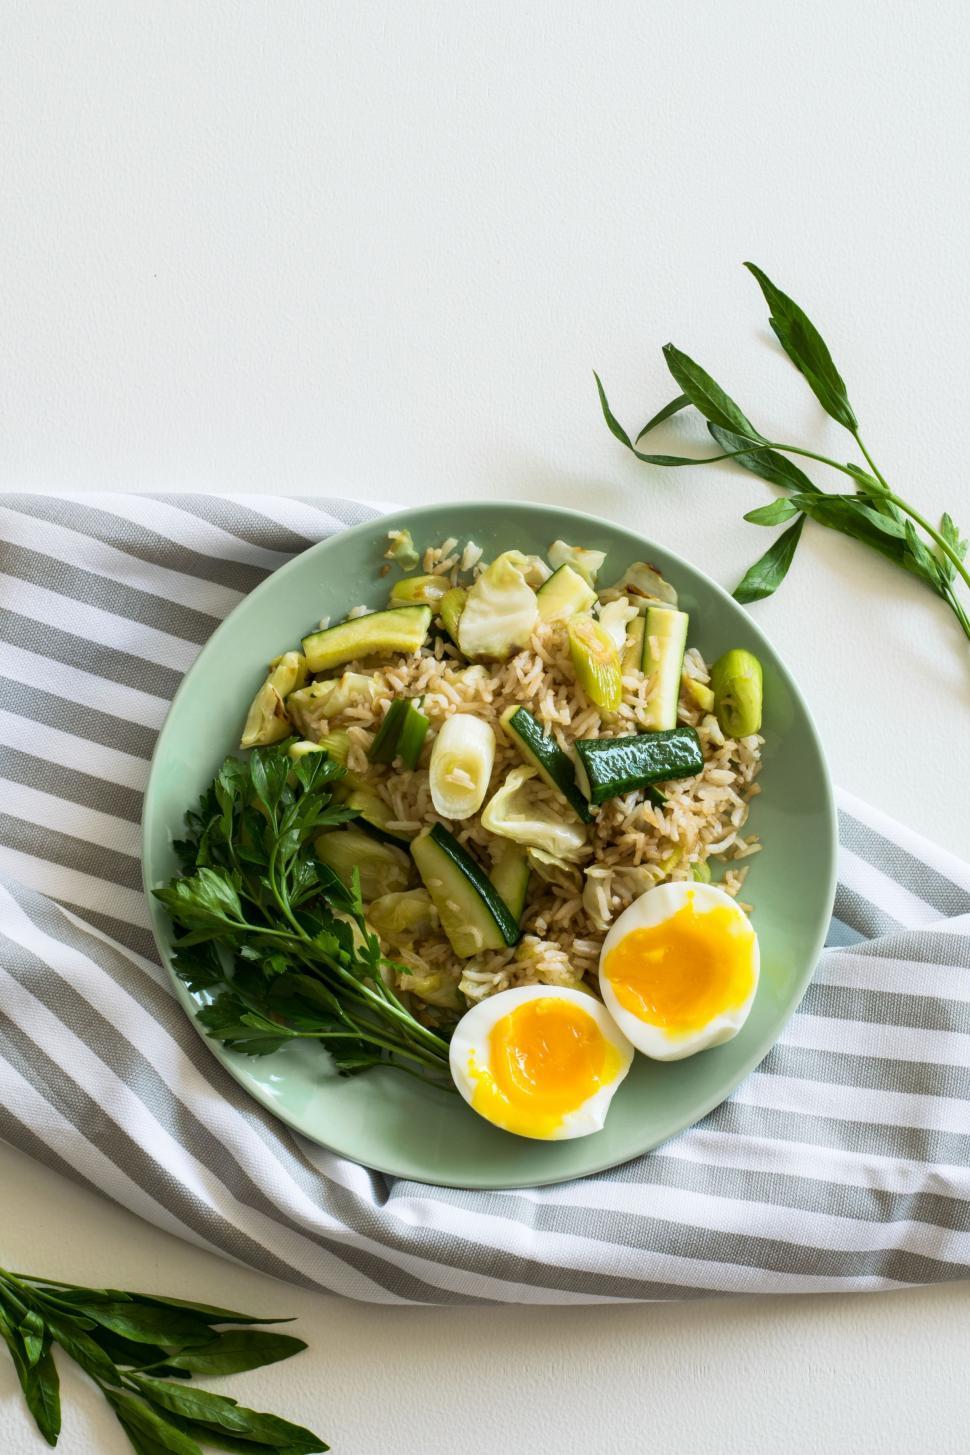 Free Image of Rice, Egg, Cucumber and Parsley for Lunch  